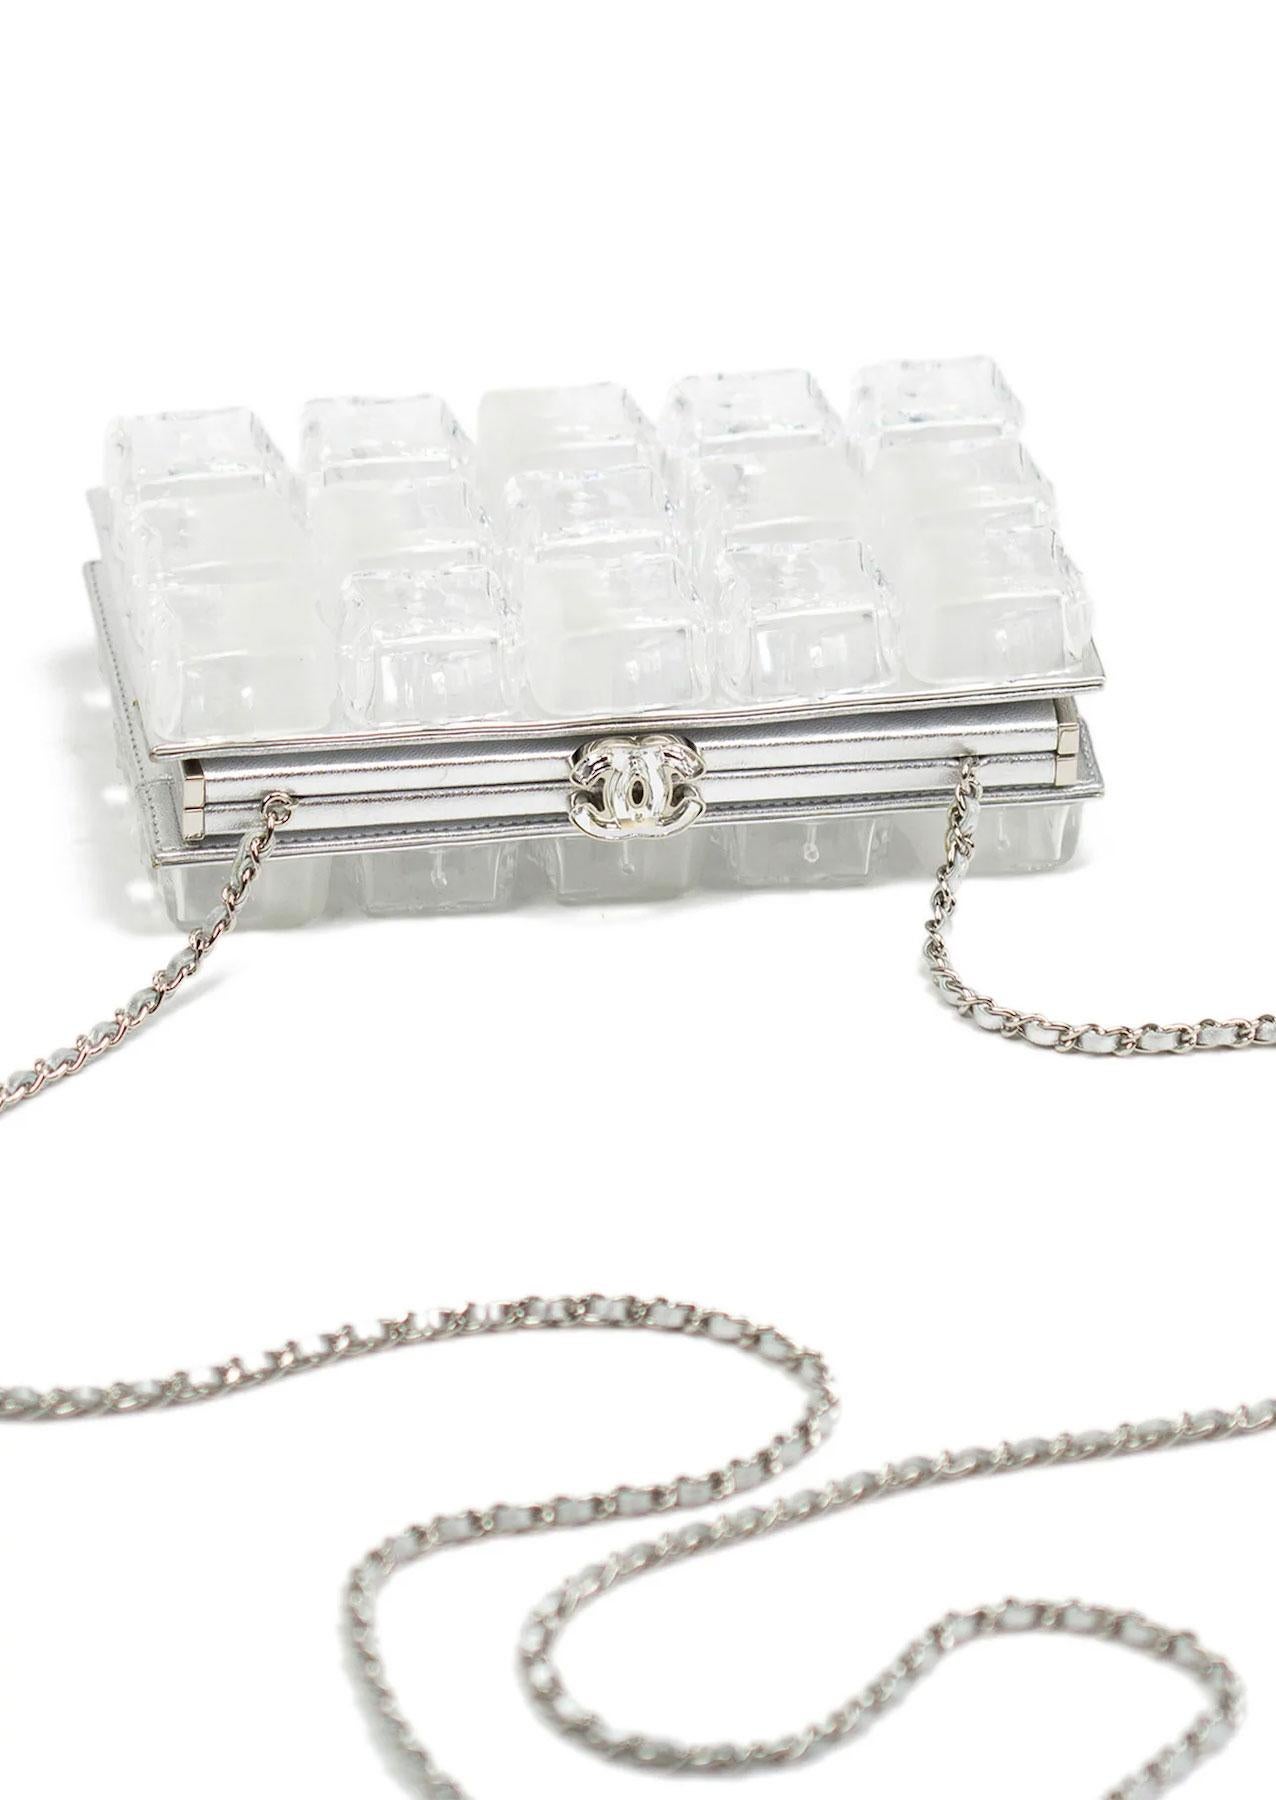  Chanel plexiglass minaudière clutch and convertible to a crossbody bag made to look like ice cubes.  

Features a CC Swarovski clasp closure, lined with silver lamb leather, silver hardware throughout, and satin lining.  

In excellent condition.